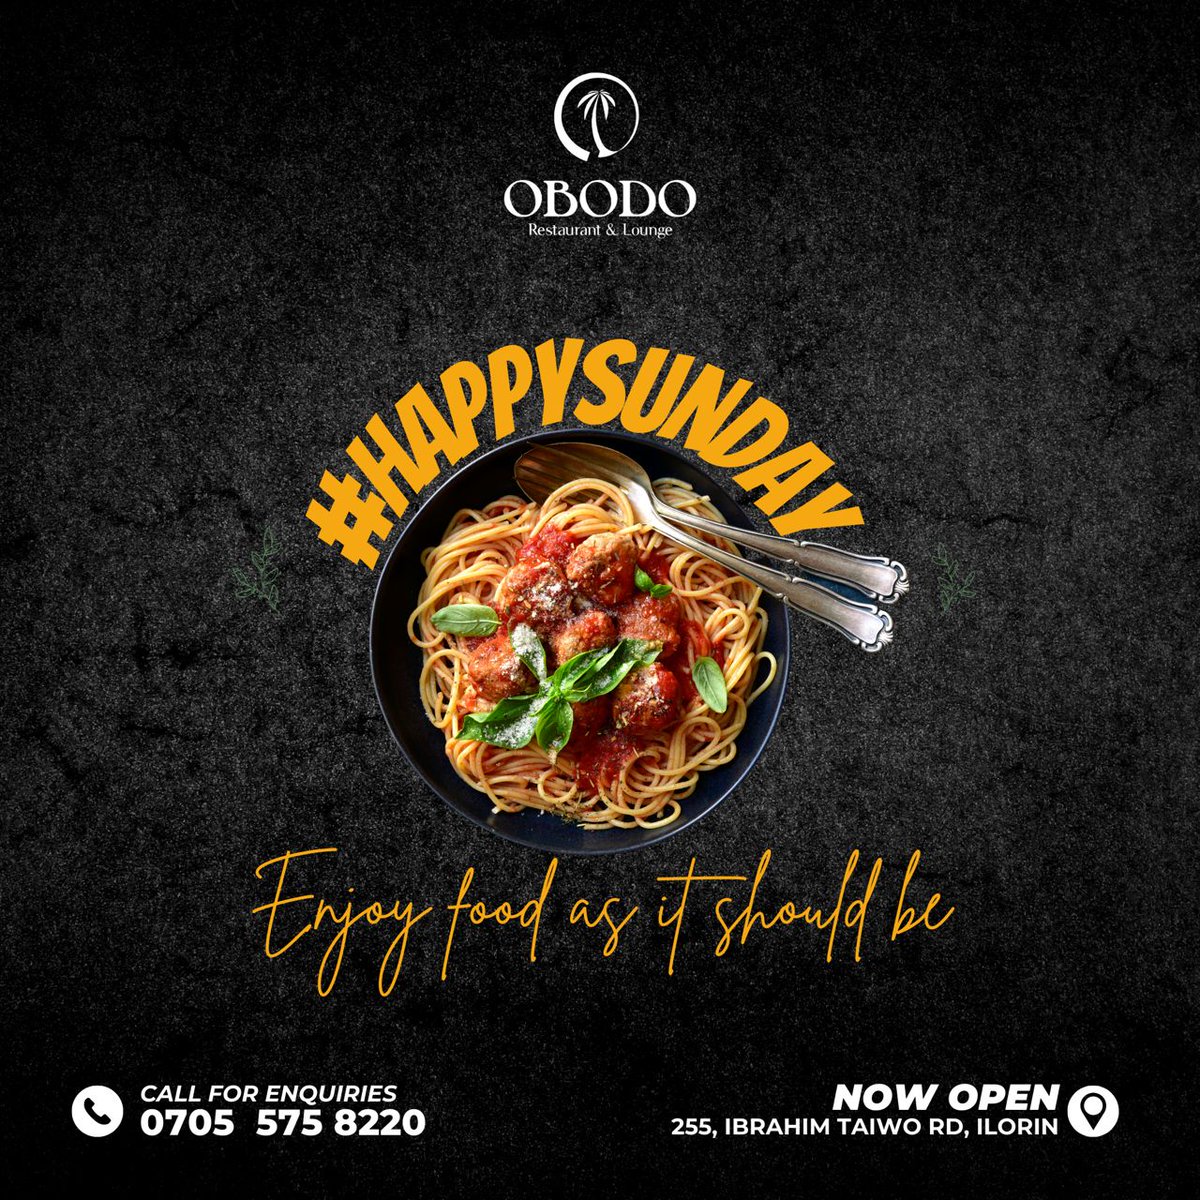 It’s Sunday, where are you eating this afternoon? Come to OBODO Restaurant & Lounge and enjoy our variety of meals at pocket friendly prices 😇😋 #obodorestaurantandlounge